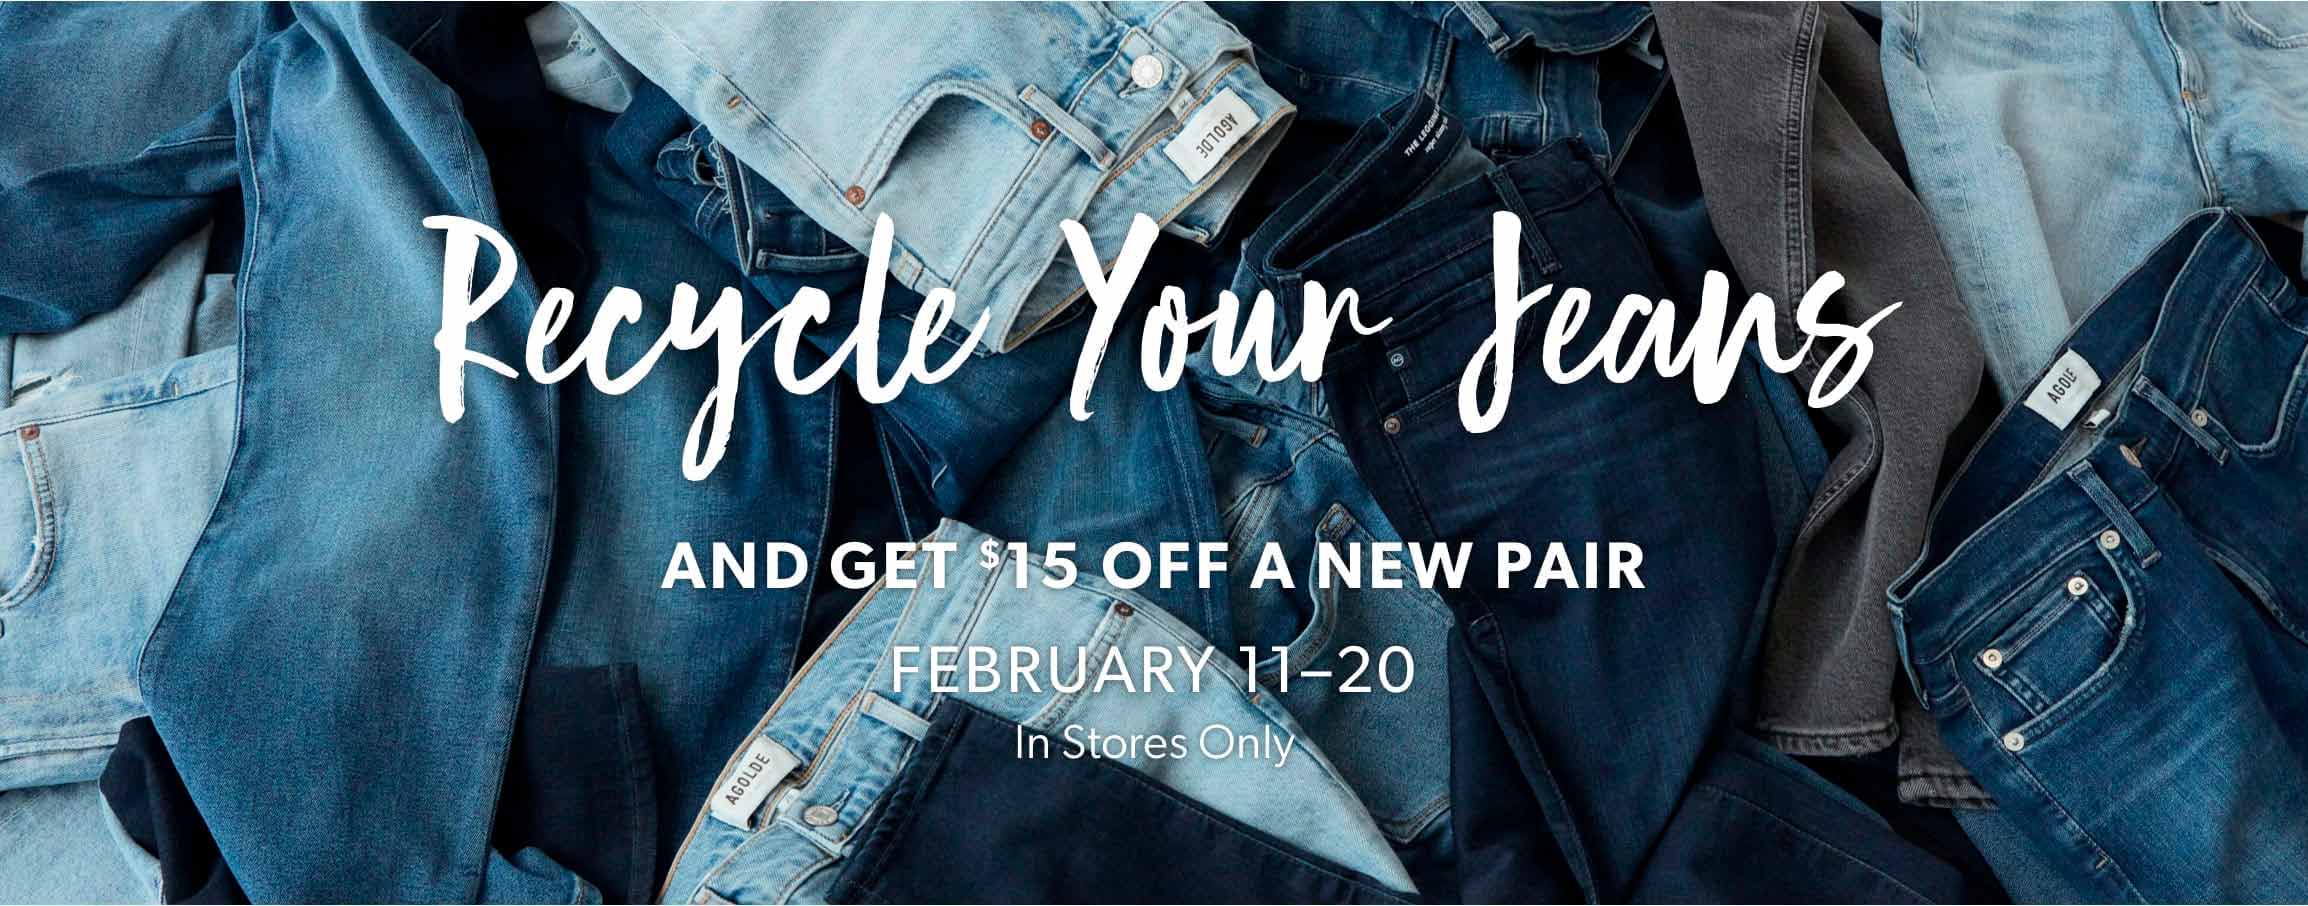 Recycle your jeans and get $15 off a new pair. February 11-20. In stores only.